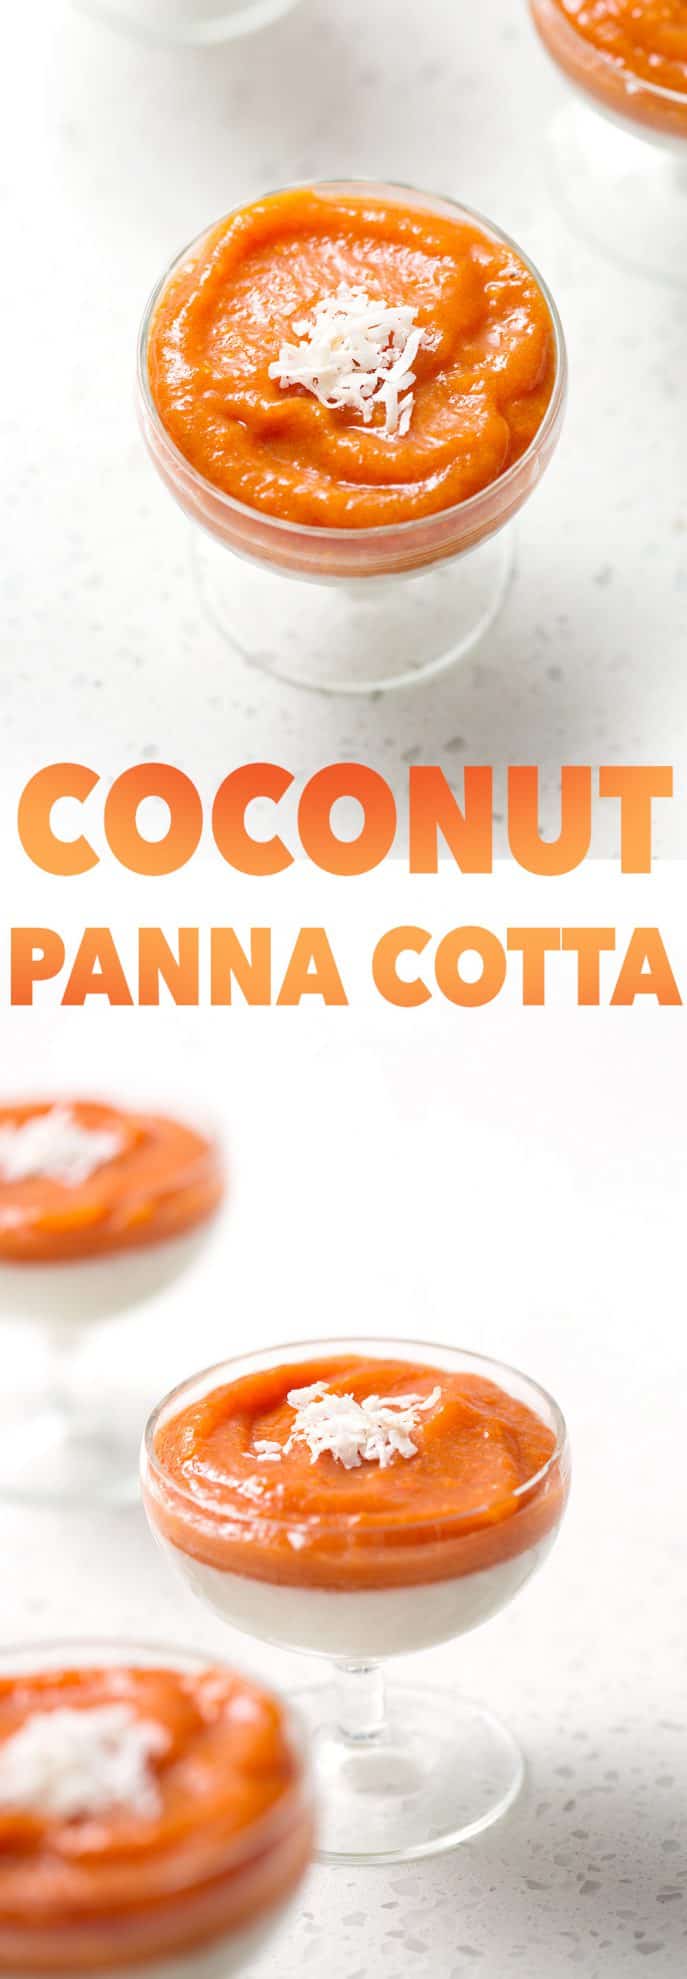 A non-dairy version of panna cotta made with coconut milk and cream. Keep it healthy with a topping of fruit, coconut chips, shredded coconut or honey. This recipe is allergy friendly (gluten, dairy, seafood, nut, egg, and soy free) and suits the autoimmune protocol and paleo diet.